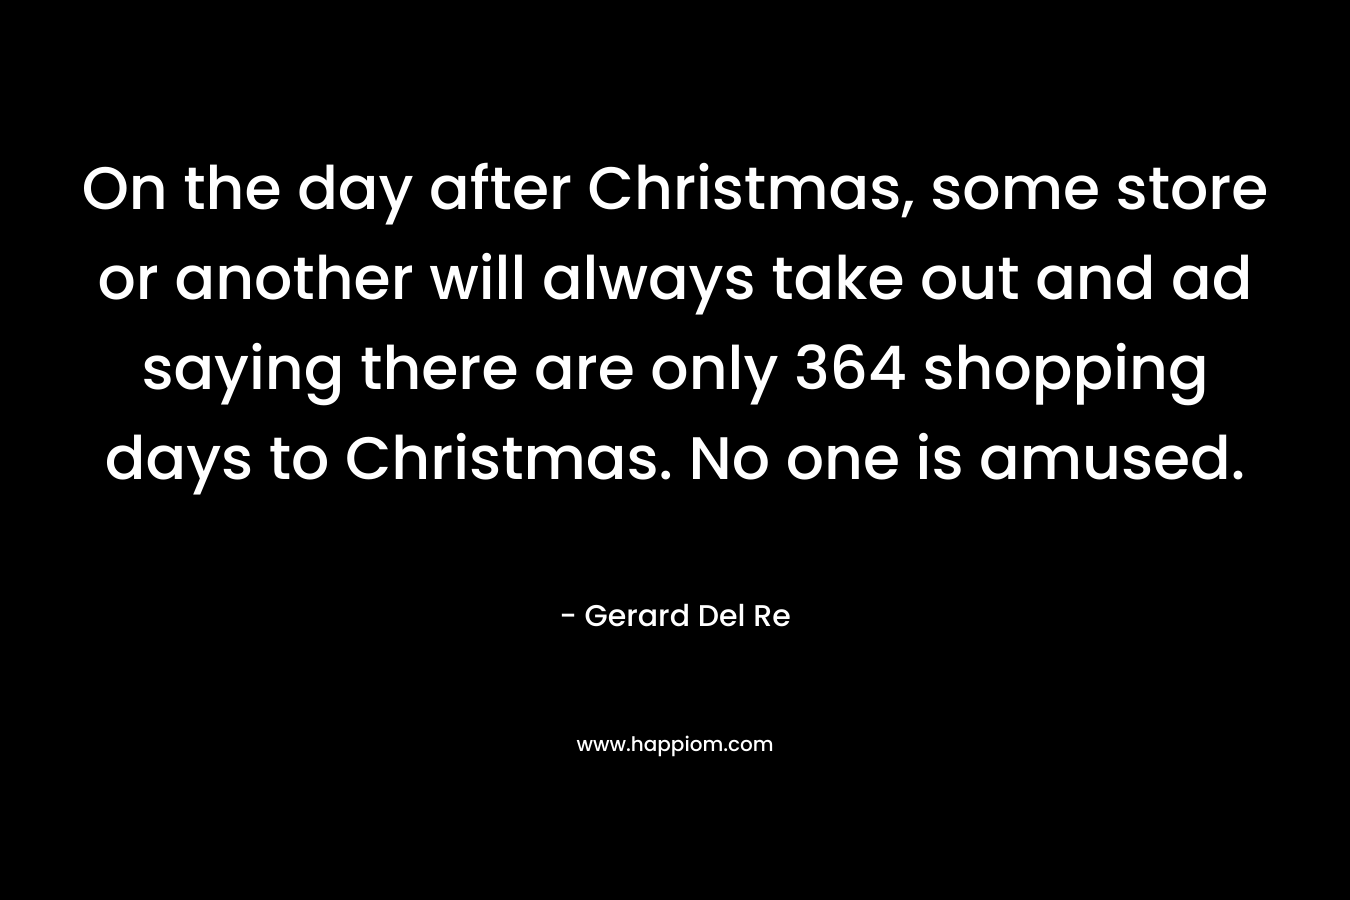 On the day after Christmas, some store or another will always take out and ad saying there are only 364 shopping days to Christmas. No one is amused. – Gerard Del Re